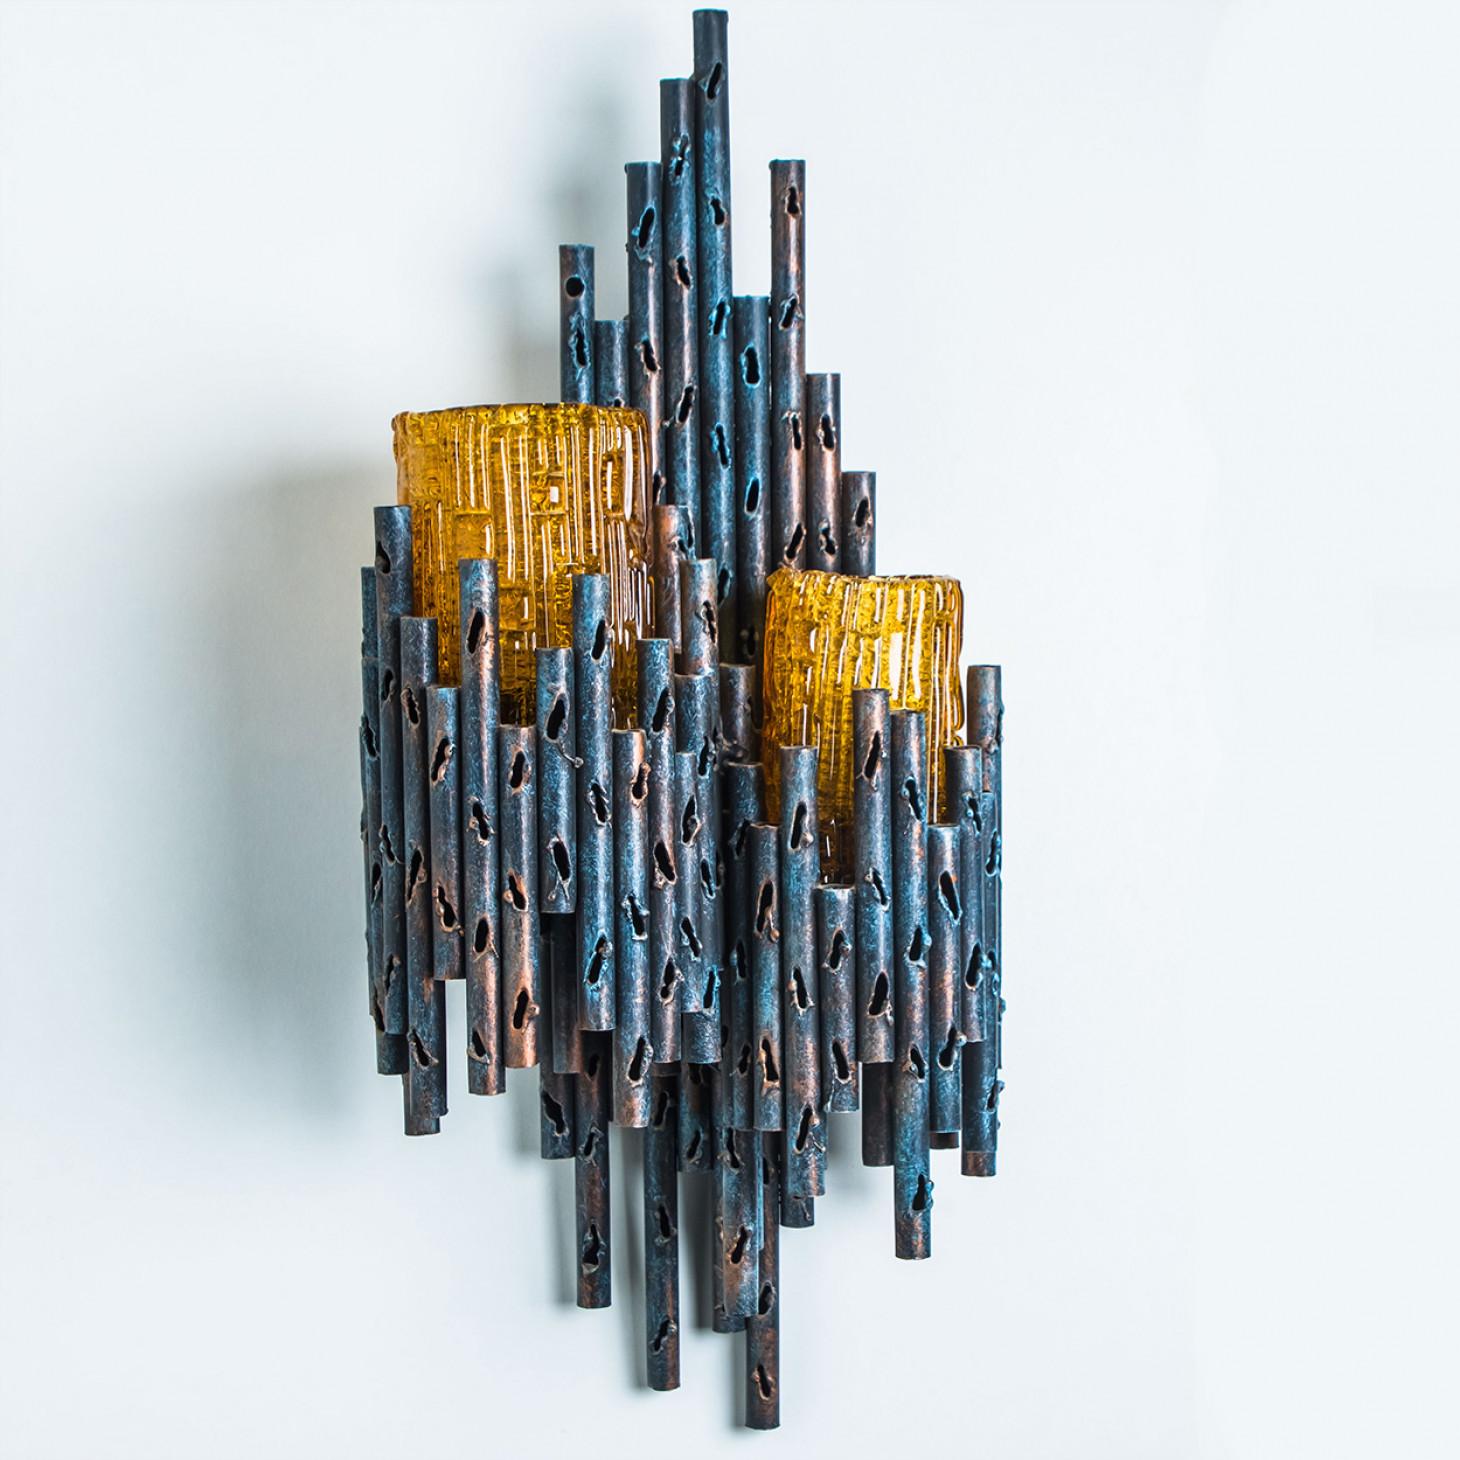 A pair of beautiful brutalist wall sconces by Tom Ahlström & Hans Ehrlich, Sweden, 1960s, each with 2 E27 bulbs. The light is two orange cups surrounded by dark blue panflute-like rods, creating a wonderful fantasy-like ambience, similar to Lord of